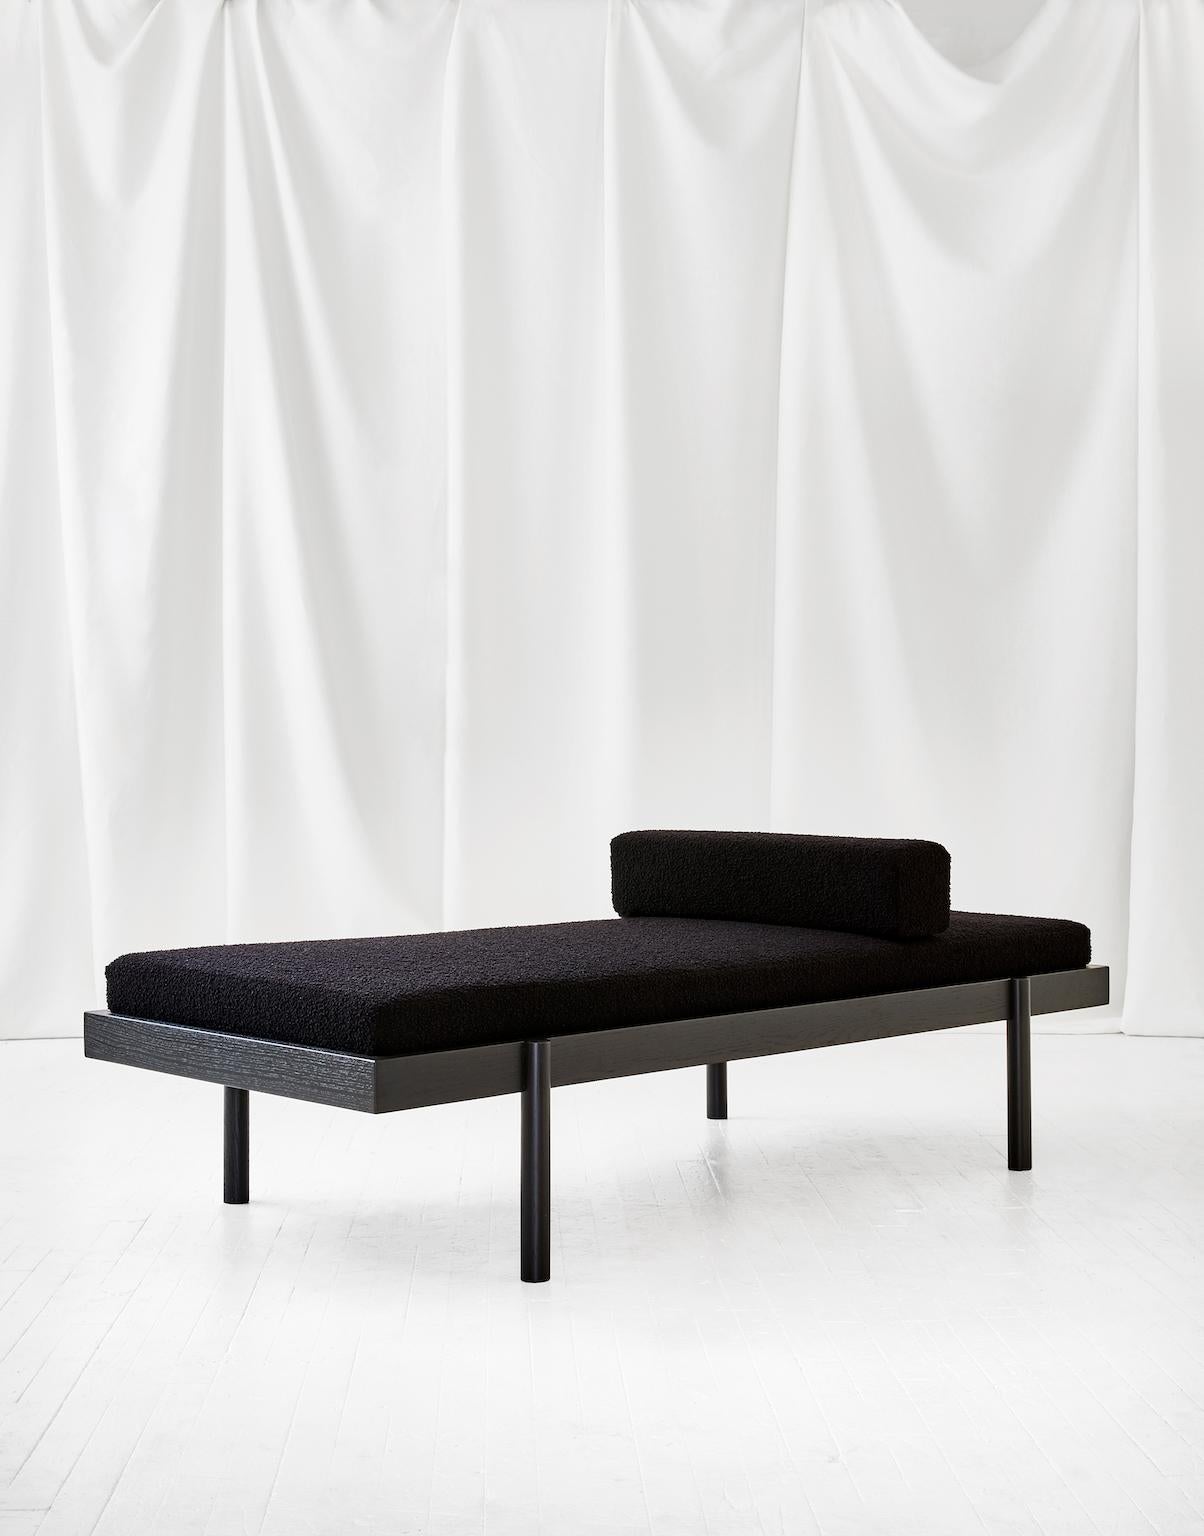 The WC2 daybed from ASH NYC is an exercise in simplicity. The hand-turned legs join seamlessly with the frame to create an elegant, handcrafted joint that defies gravity. 

The form takes reference from the great French designs of the 1950s,